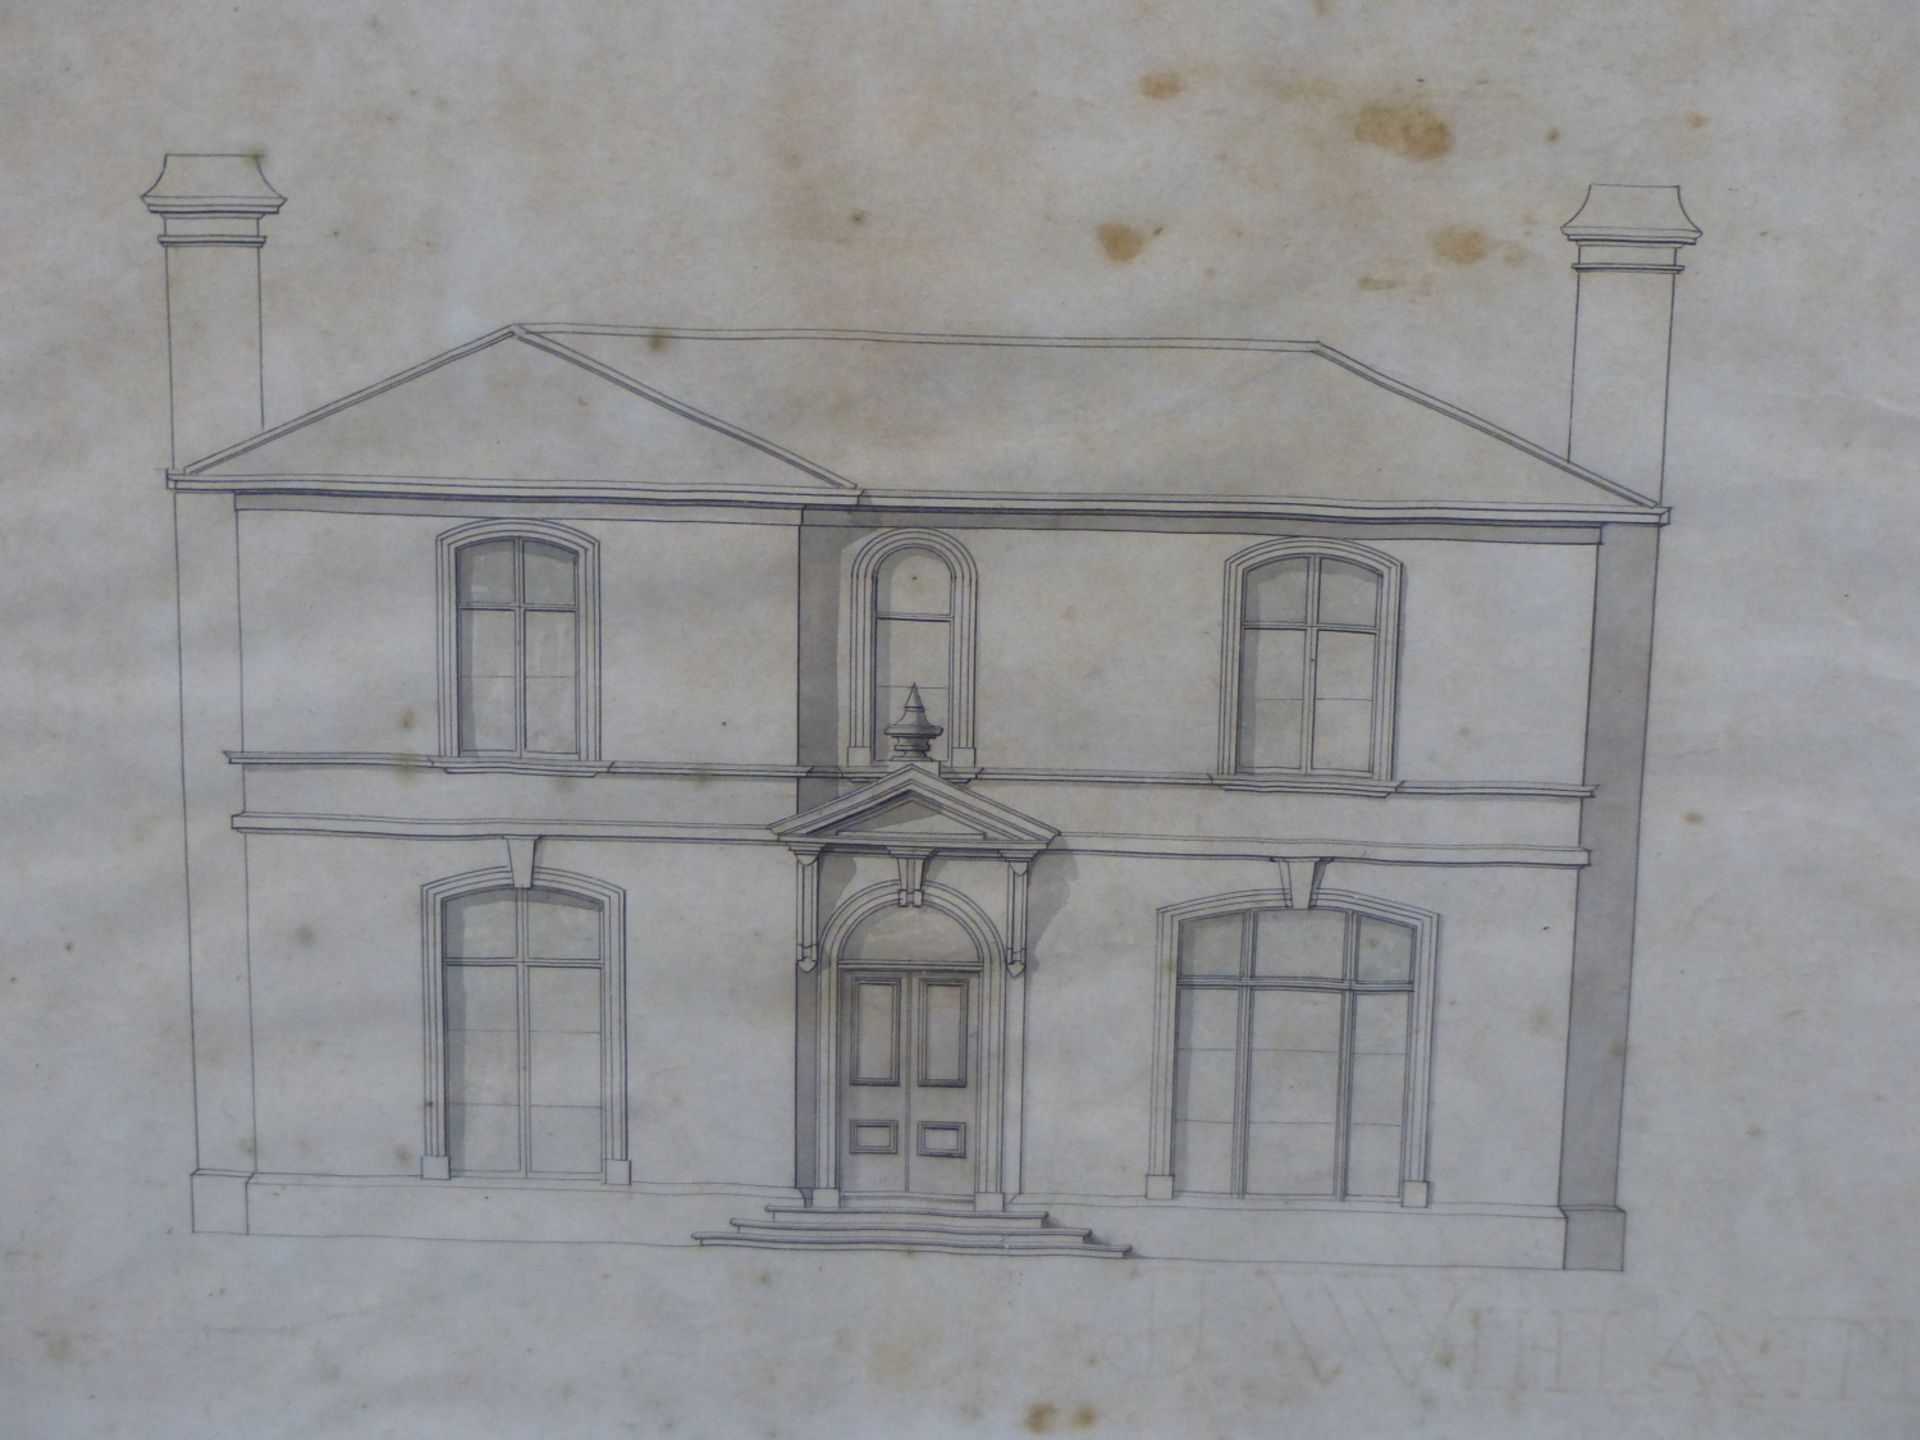 ARCHITECTURAL PLANS, AN INTERESTING SET OF MID 19TH CENTURY ARCHITECTS PLANS FOR AN IMPRESSIVE